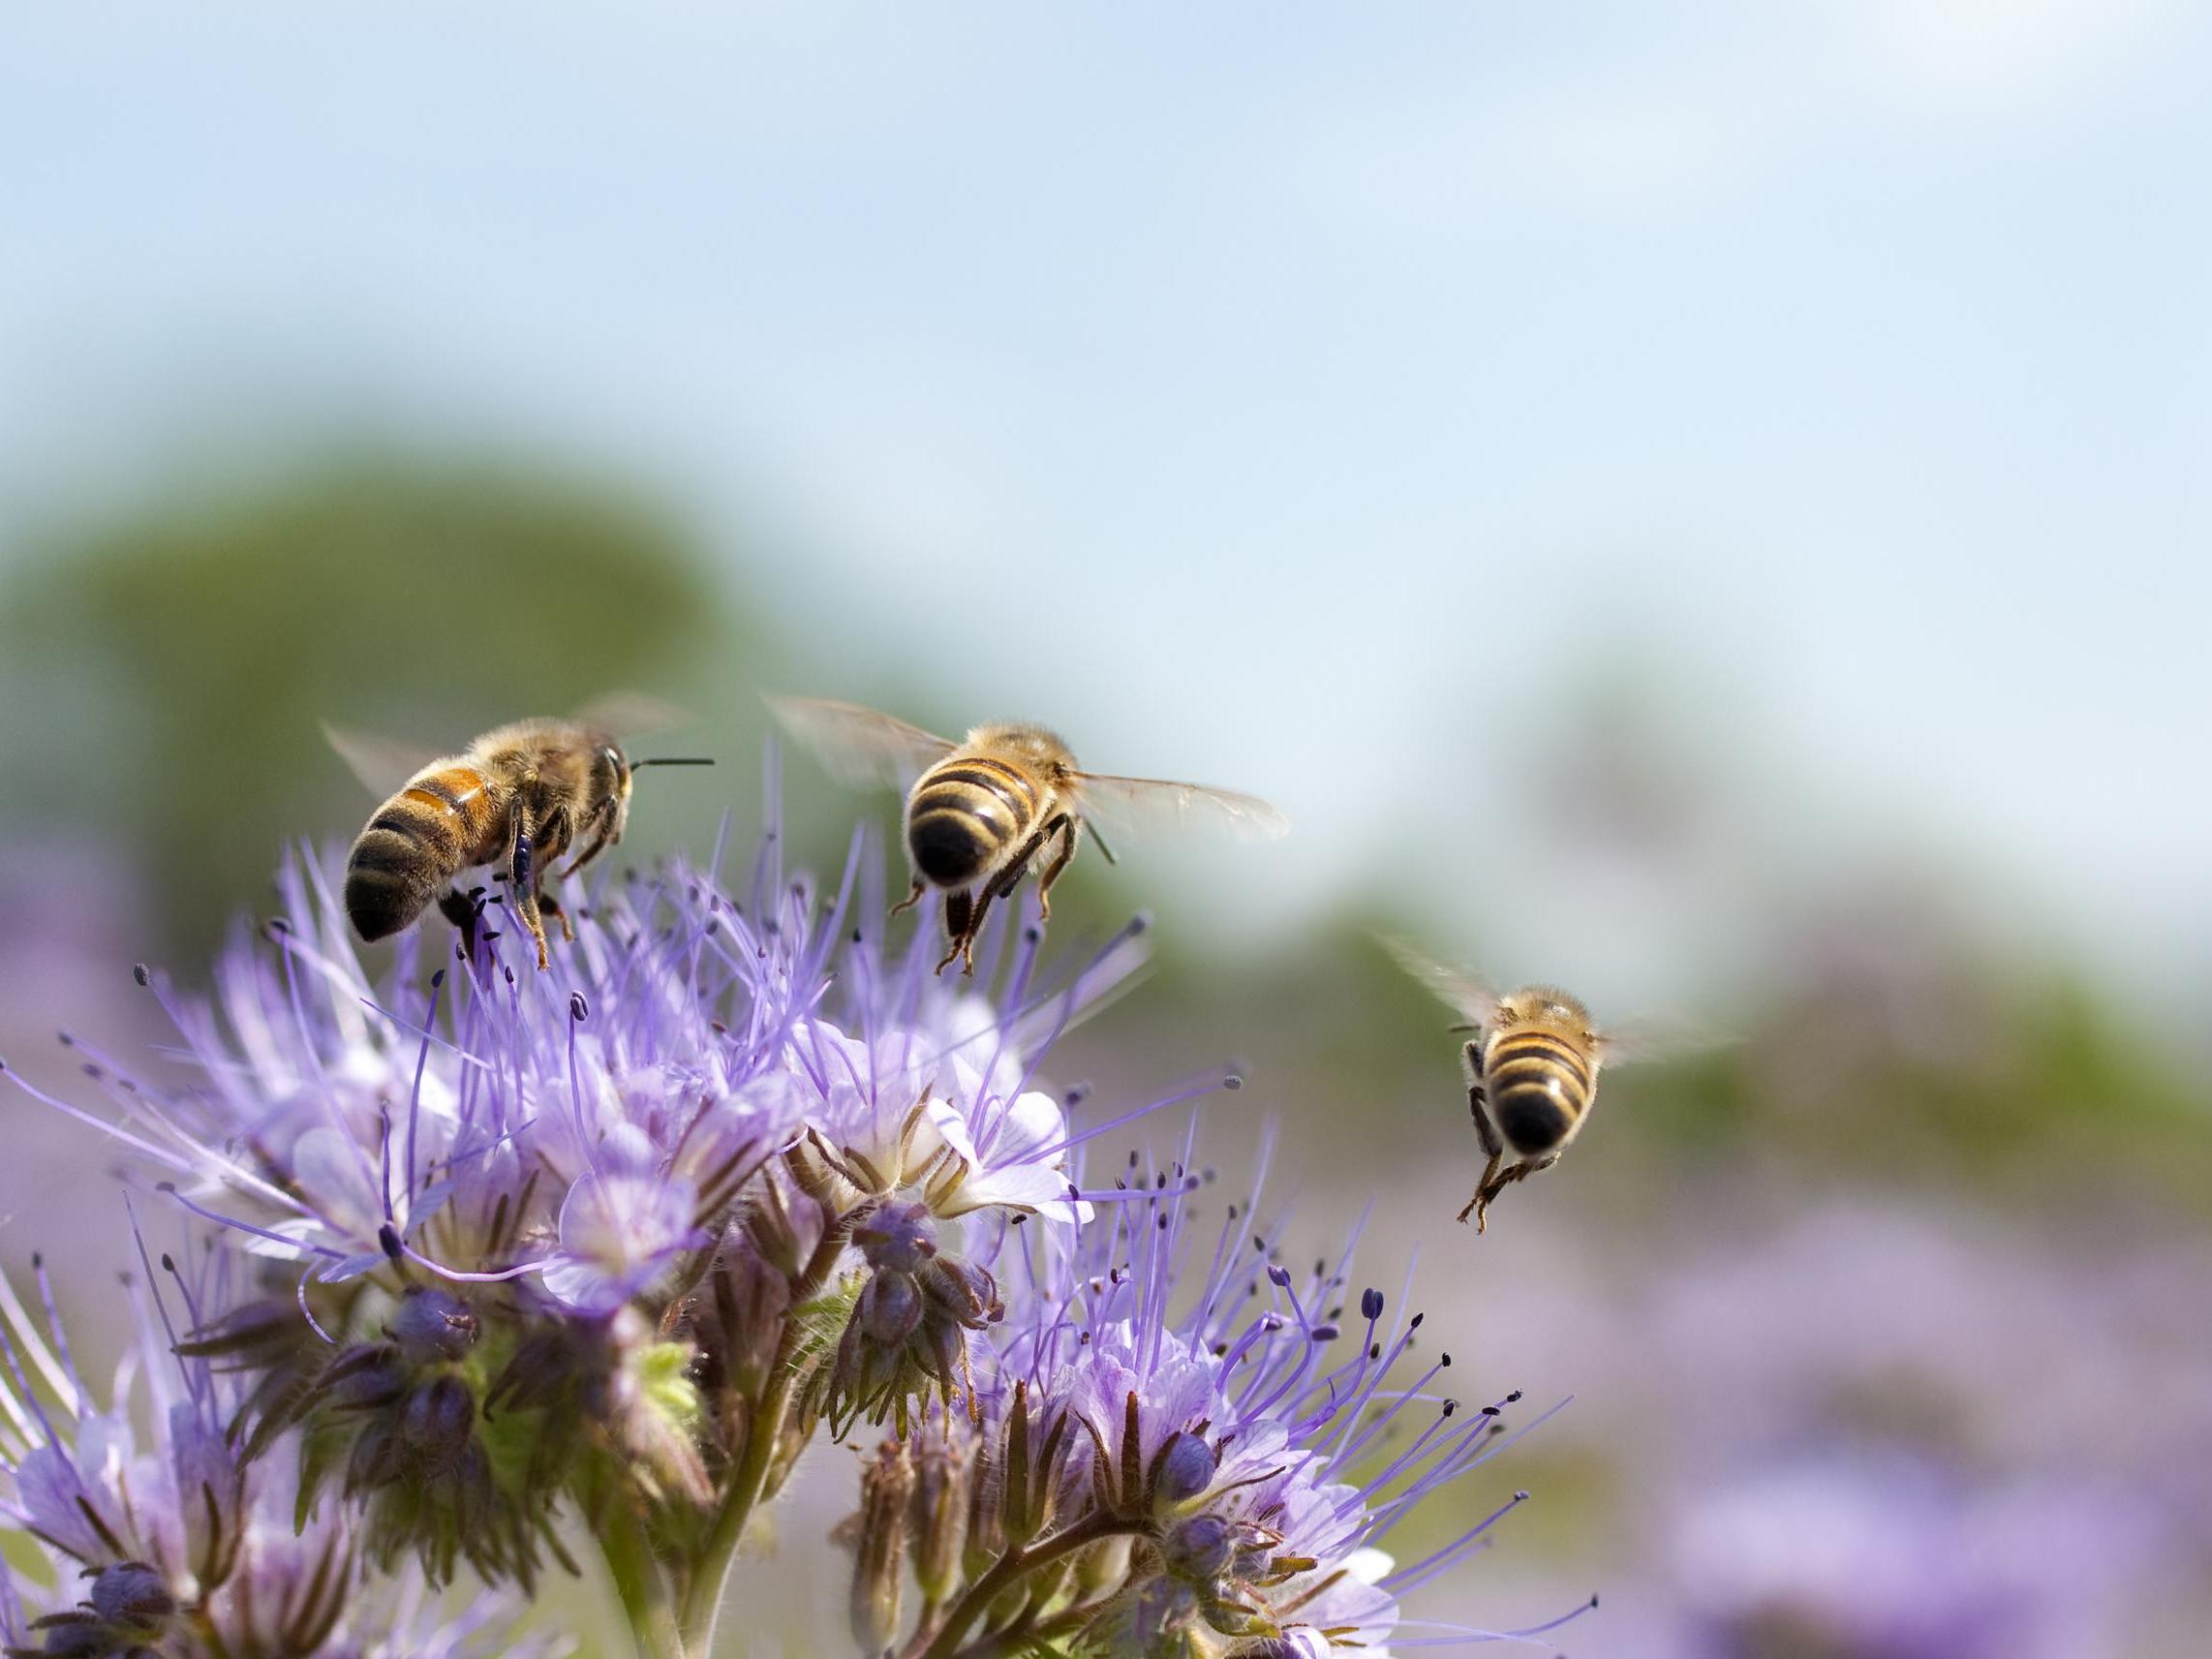 Take away one substantial part of any ecosystem – such as pollination by insects – and you cannot know for sure what the eventual effects would be